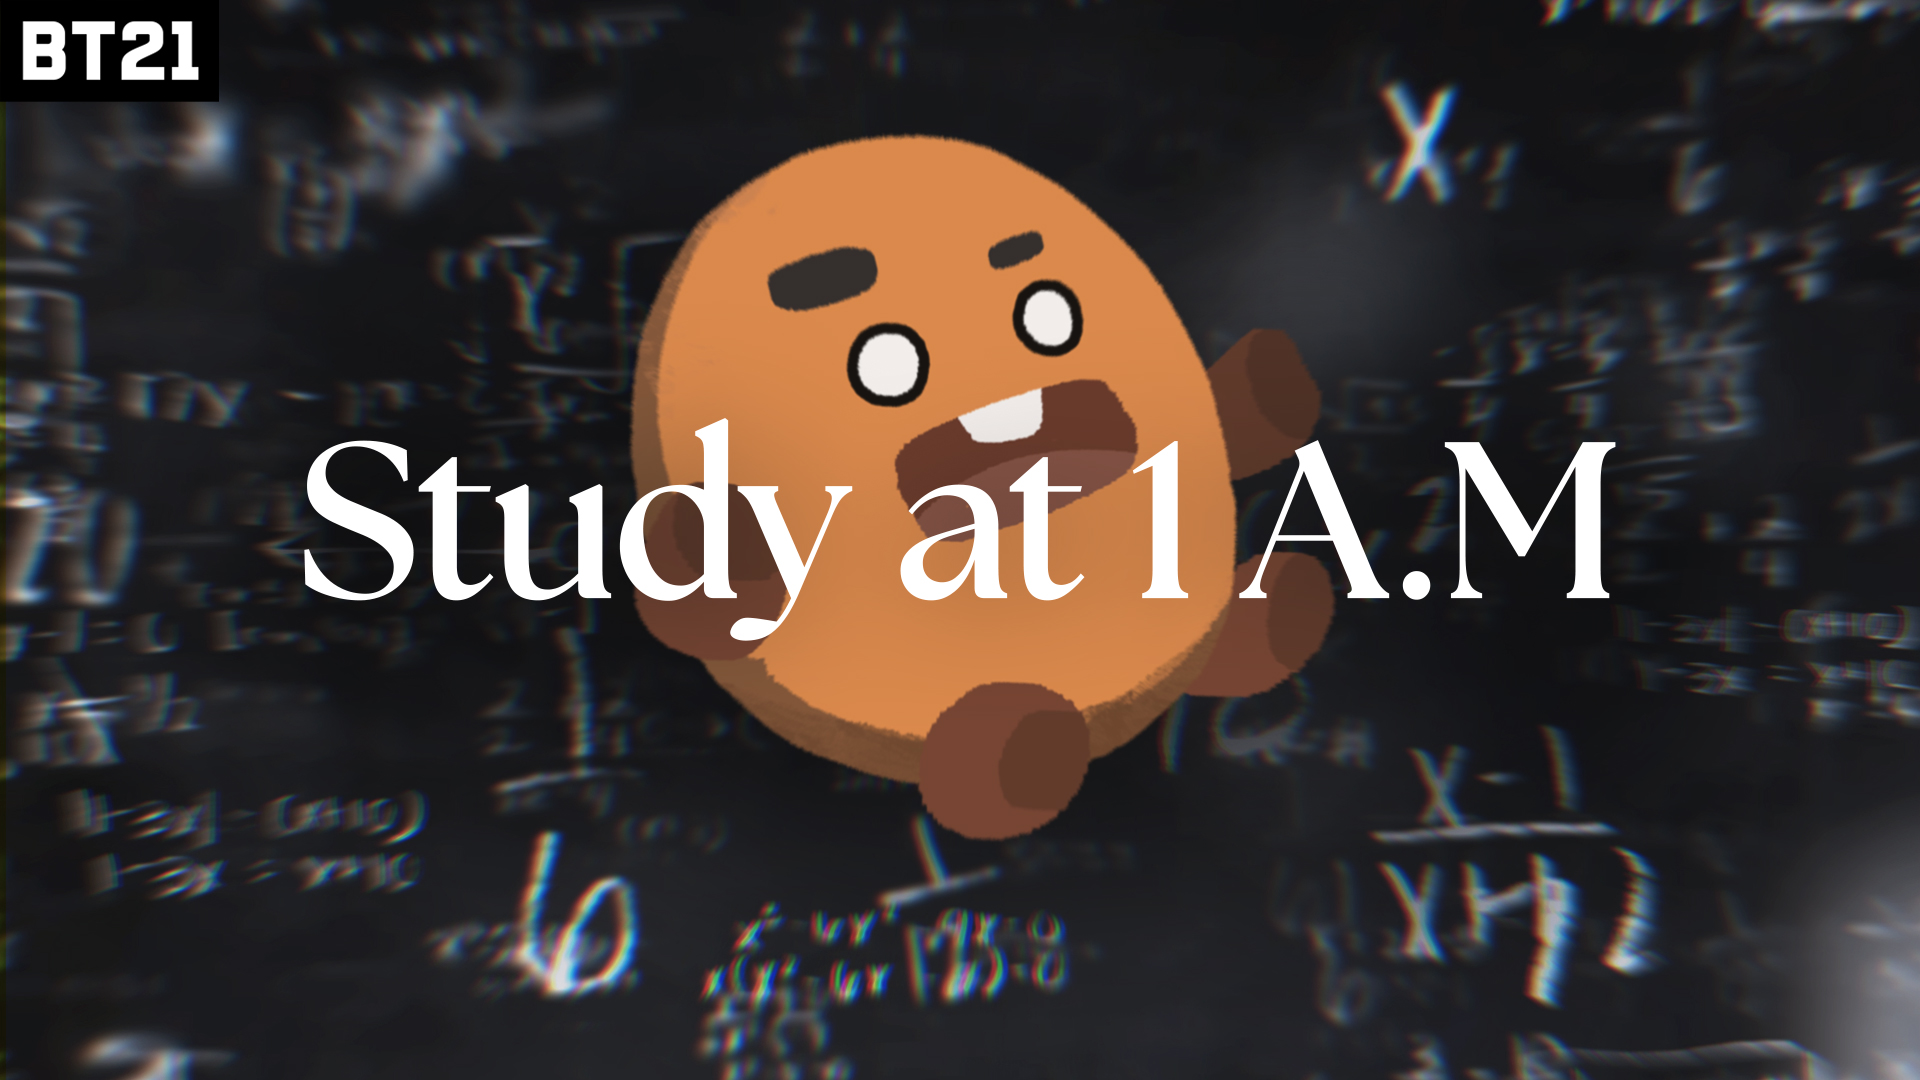 [Playlist] SHOOKY After Studying for 5 Minutes ㅣSHOOKY, 재즈가 뭐라고 생각해? ㅣStudy Playlist ㅣJazz for Study